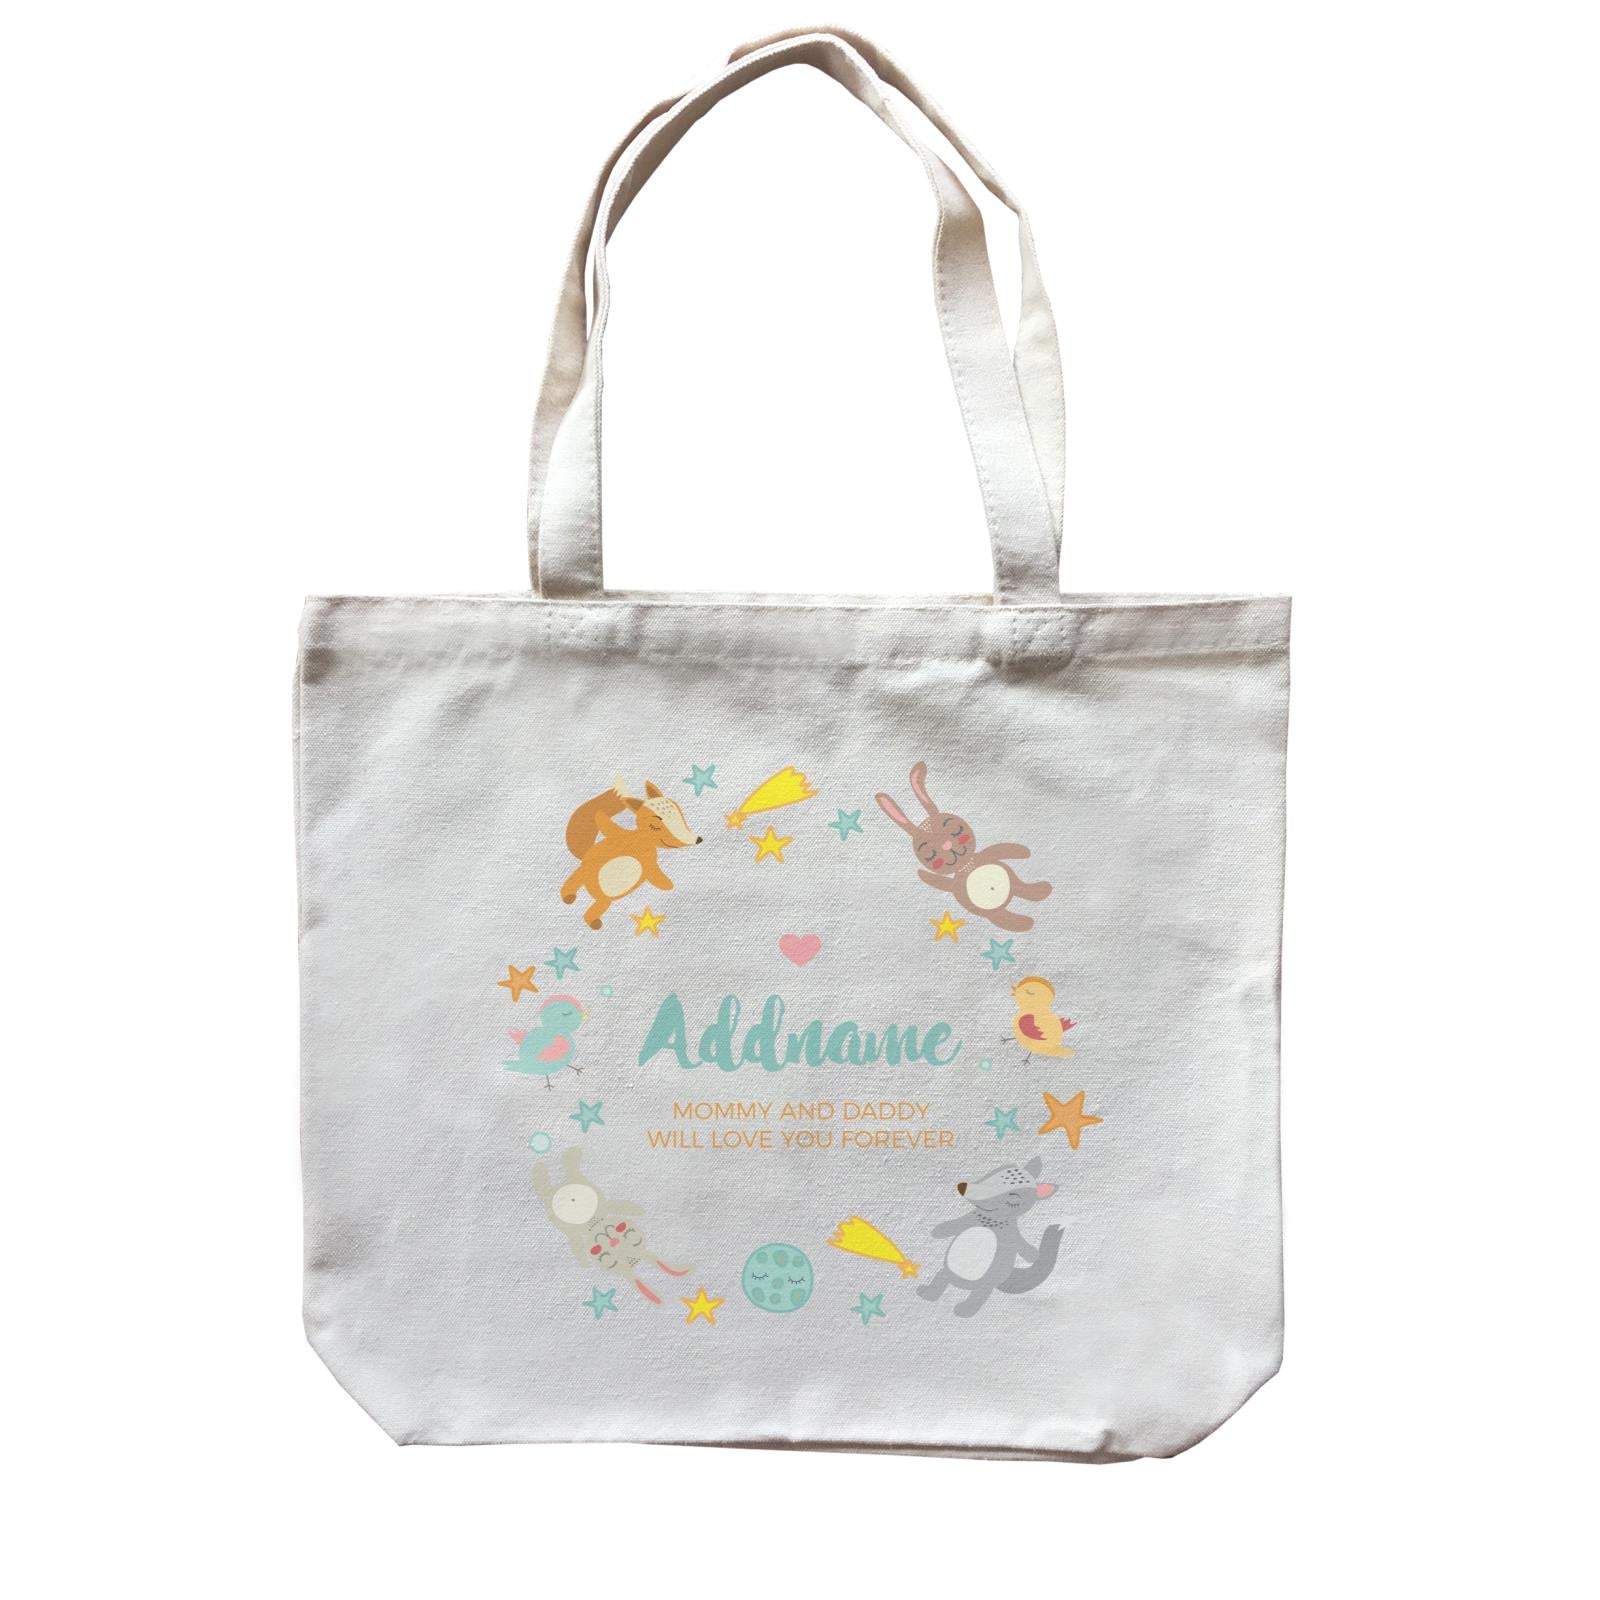 Cute Woodland Animals with Star Elements Personalizable with Name and Text Canvas Bag